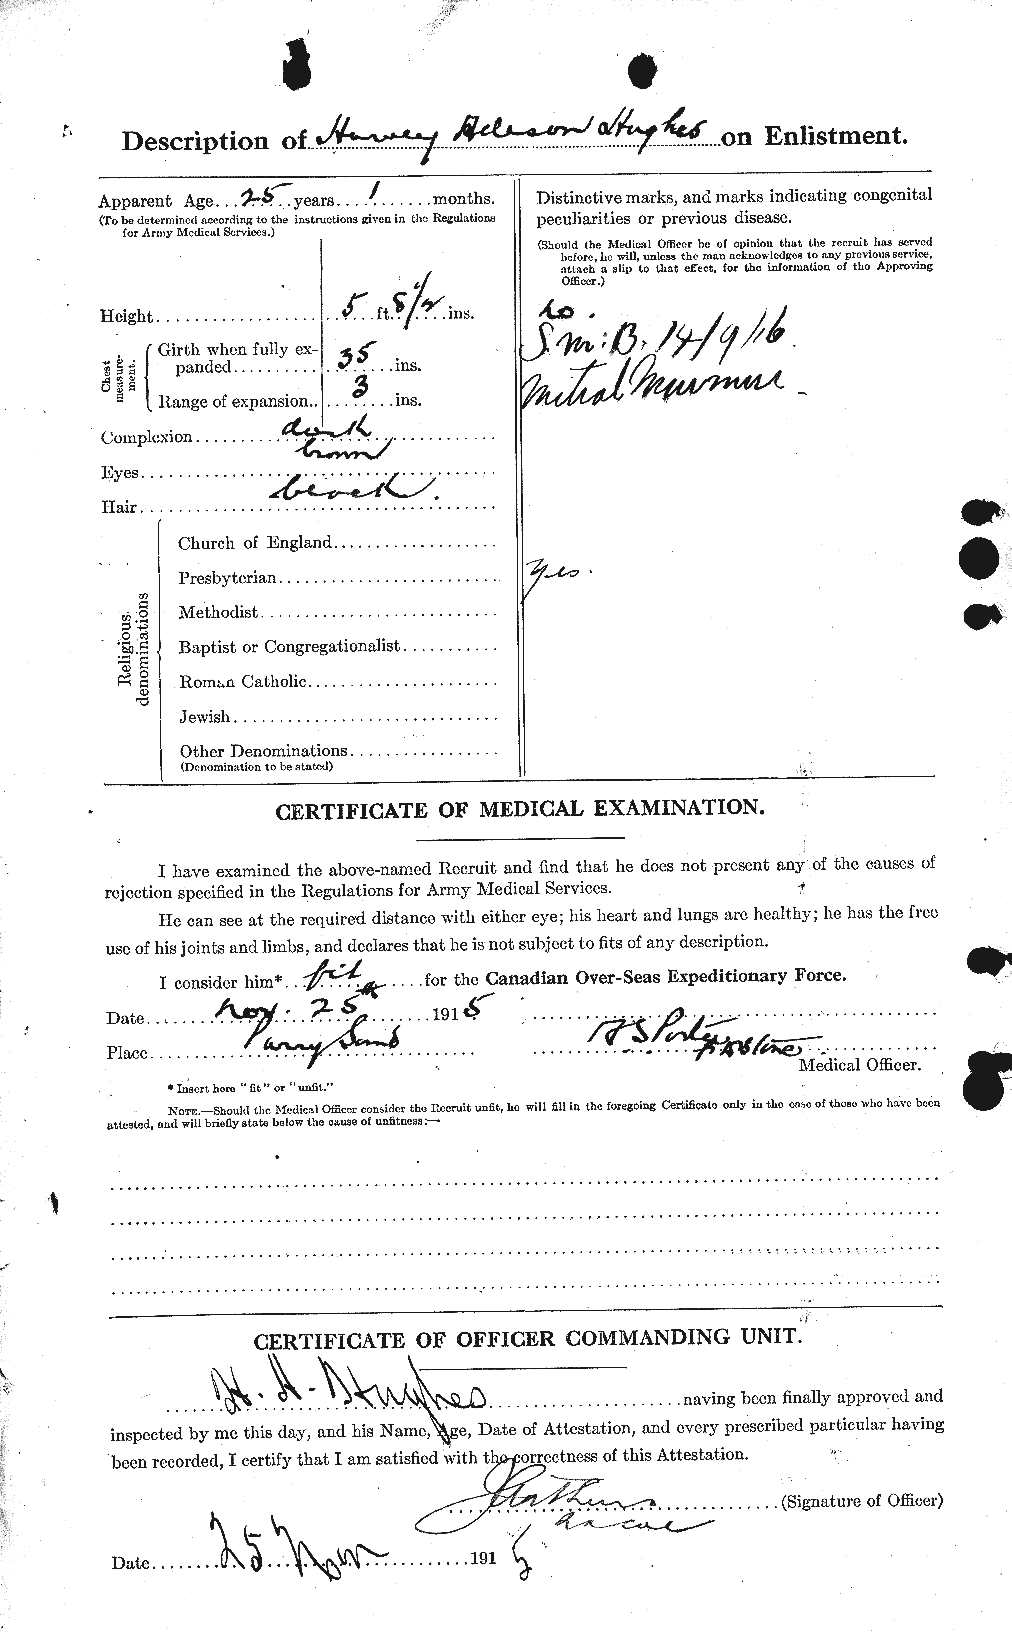 Personnel Records of the First World War - CEF 403878b